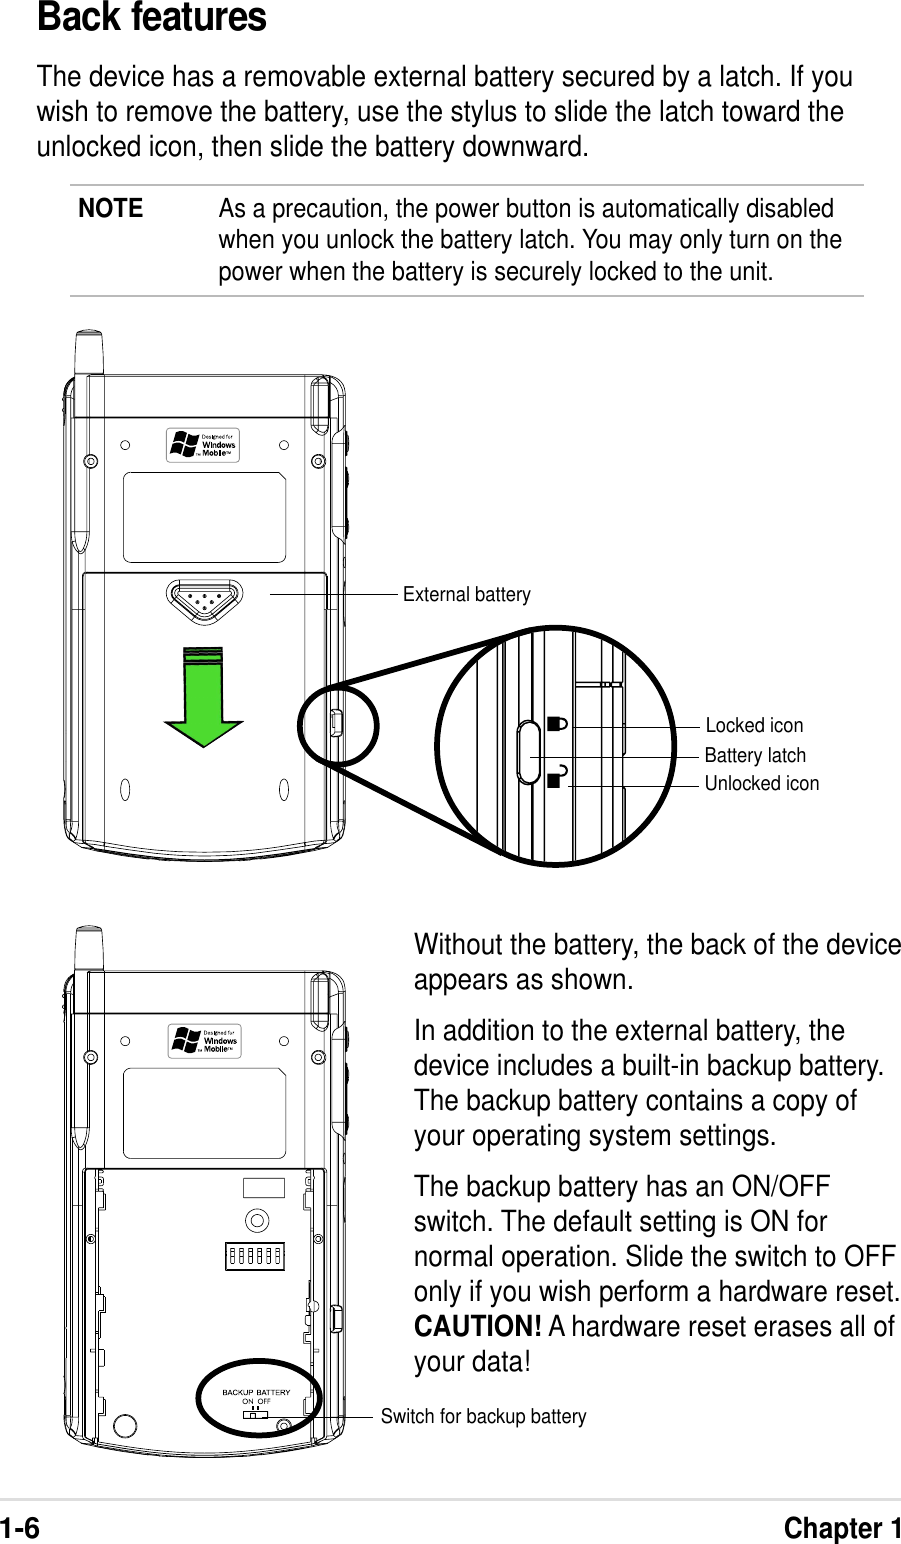 1-6Chapter 1Back featuresThe device has a removable external battery secured by a latch. If youwish to remove the battery, use the stylus to slide the latch toward theunlocked icon, then slide the battery downward.Without the battery, the back of the deviceappears as shown.In addition to the external battery, thedevice includes a built-in backup battery.The backup battery contains a copy ofyour operating system settings.The backup battery has an ON/OFFswitch. The default setting is ON fornormal operation. Slide the switch to OFFonly if you wish perform a hardware reset.CAUTION! A hardware reset erases all ofyour data!NOTE As a precaution, the power button is automatically disabledwhen you unlock the battery latch. You may only turn on thepower when the battery is securely locked to the unit.External batteryLocked iconUnlocked iconBattery latchSwitch for backup battery